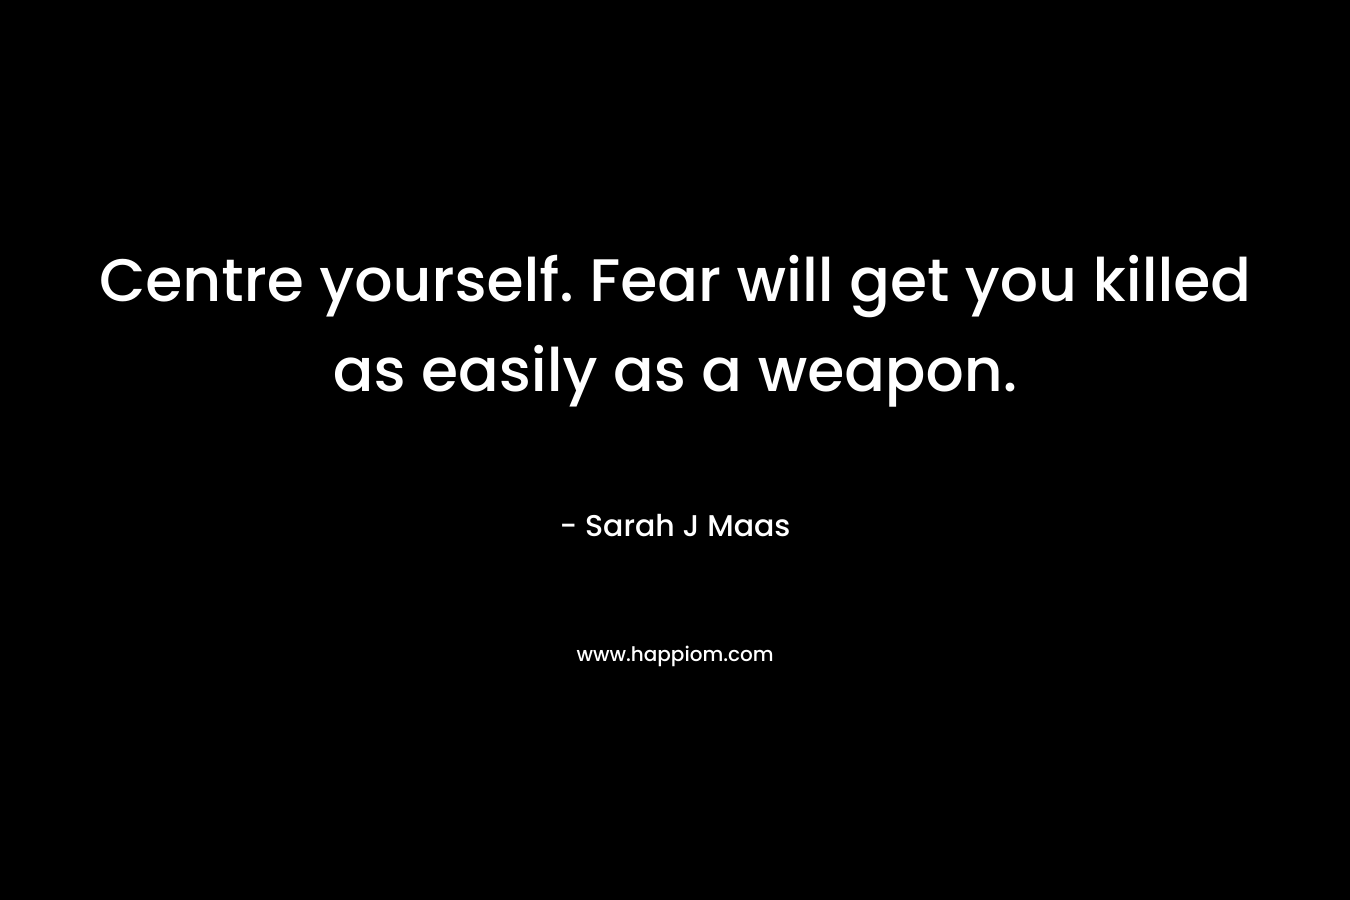 Centre yourself. Fear will get you killed as easily as a weapon.